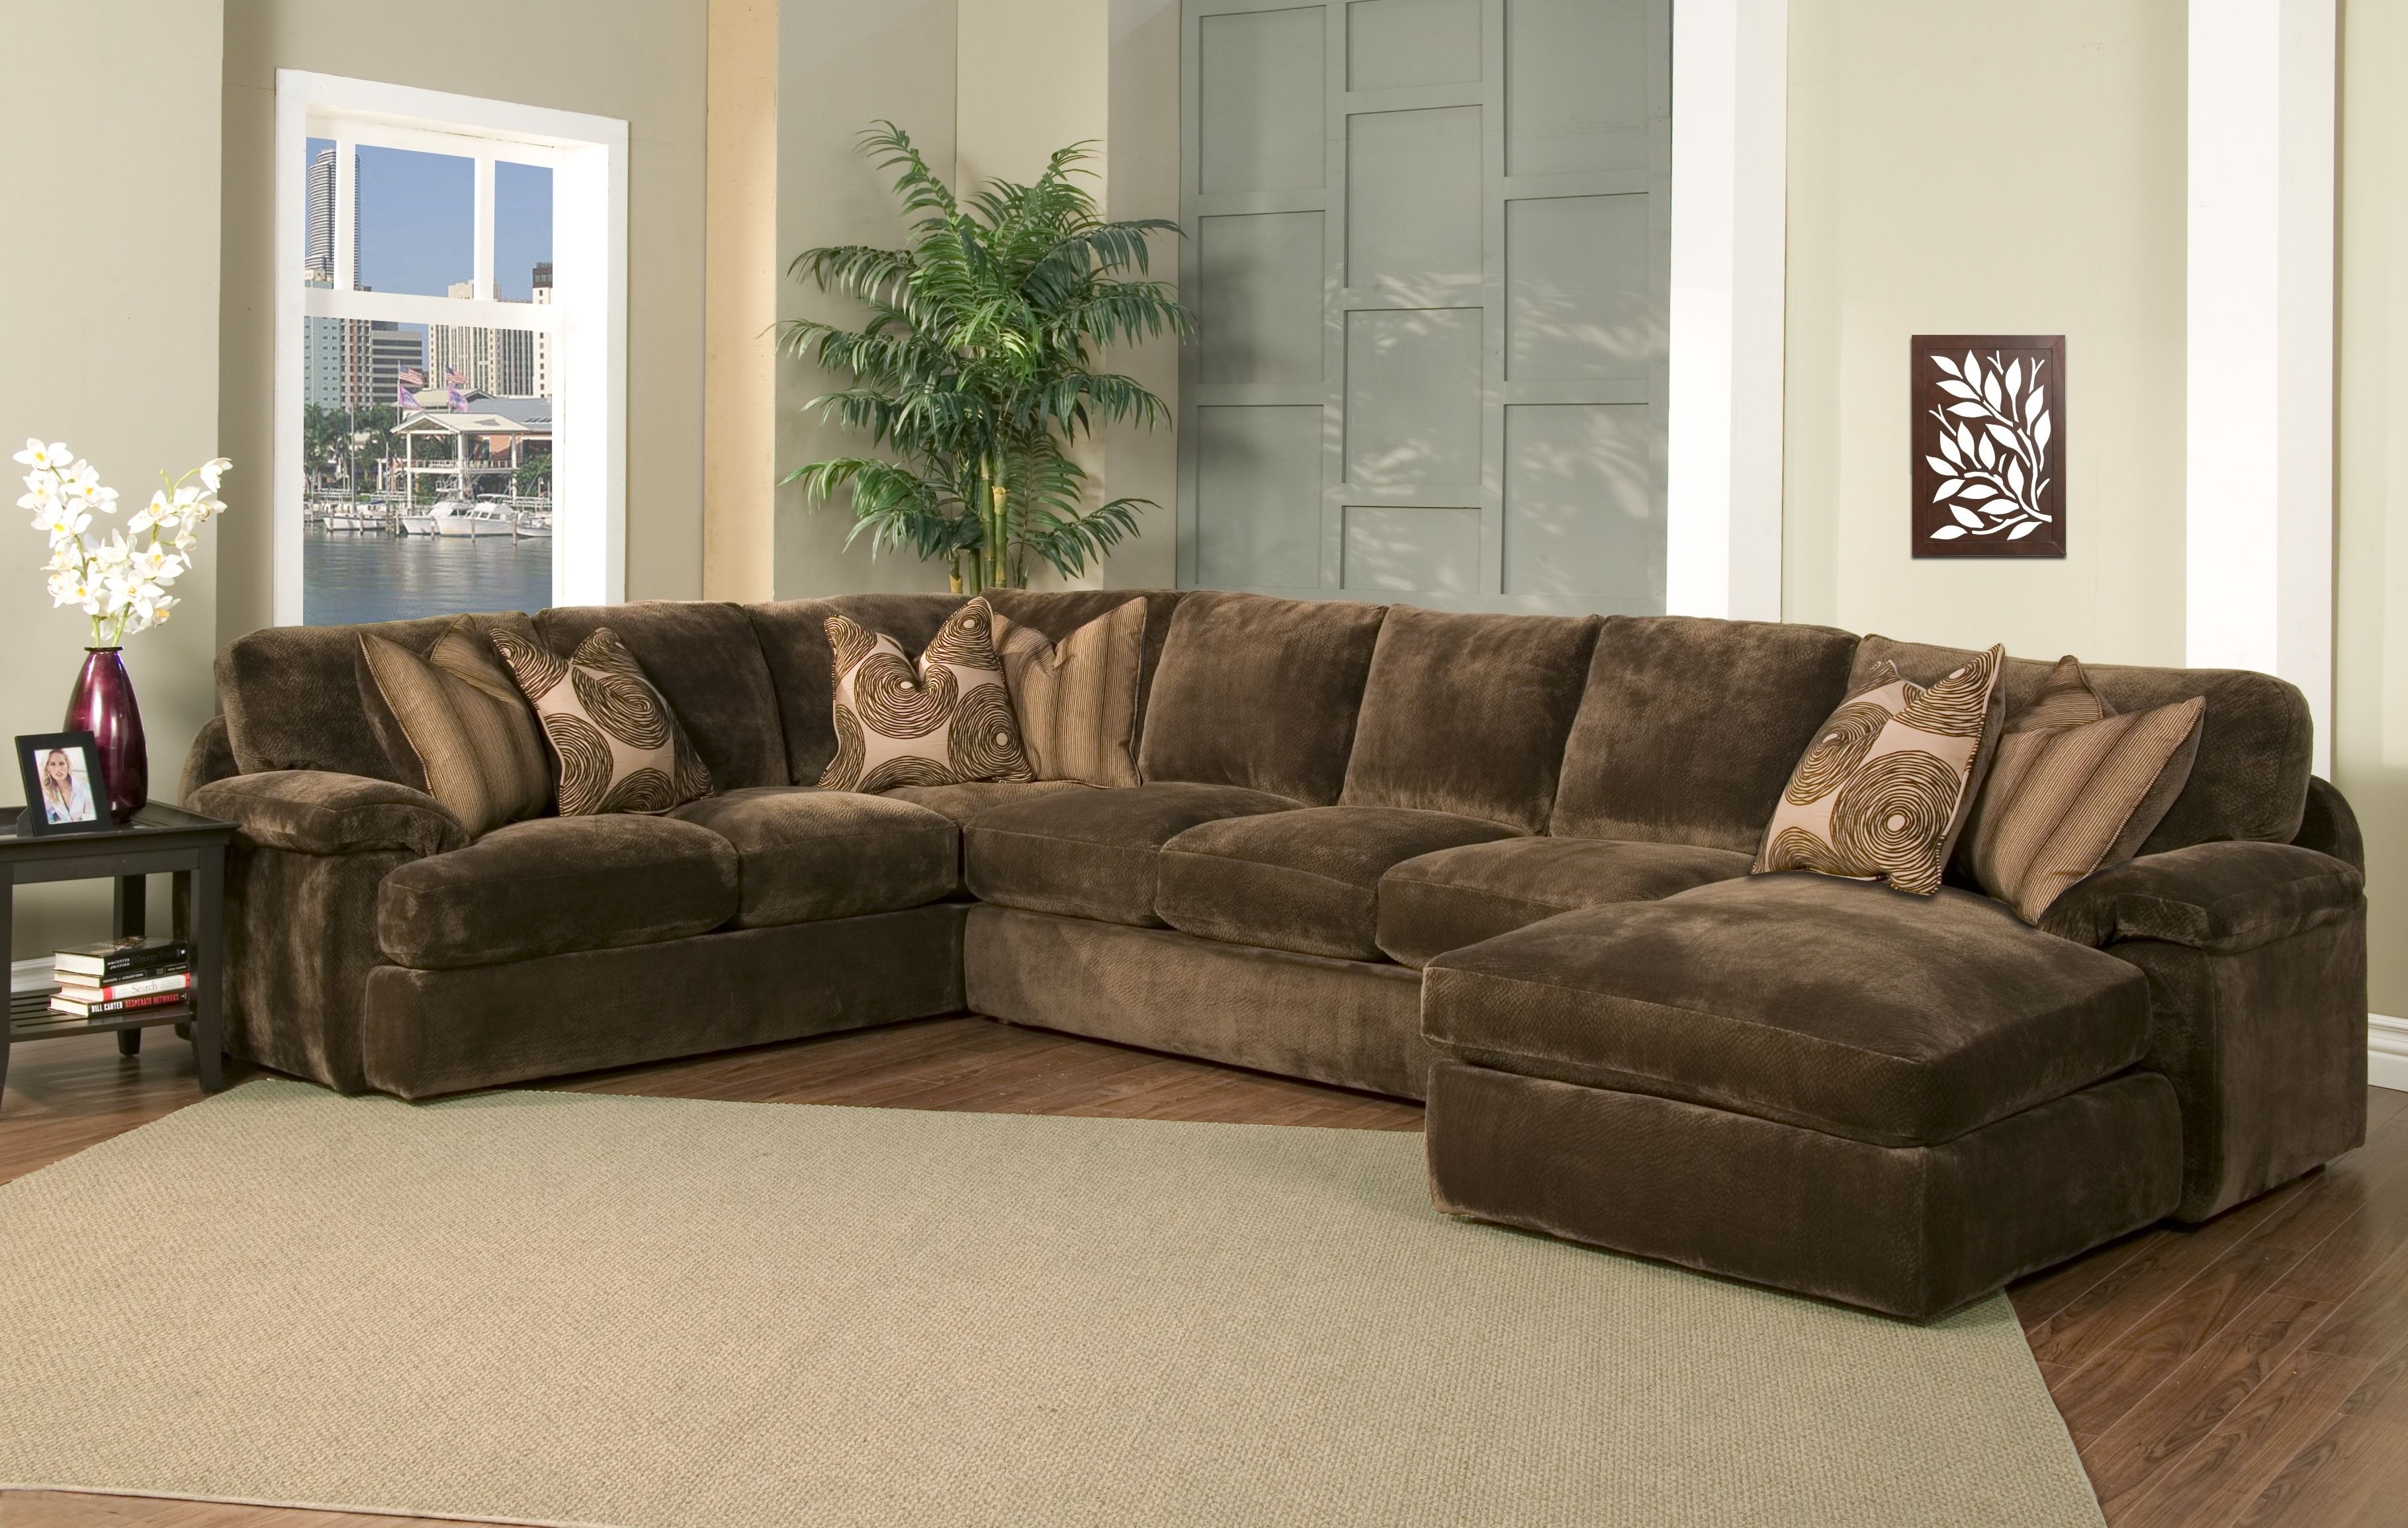 Down Feather Sectional Sofa • Sectional Sofa With Regard To Down Feather Sectional Sofas (View 4 of 10)